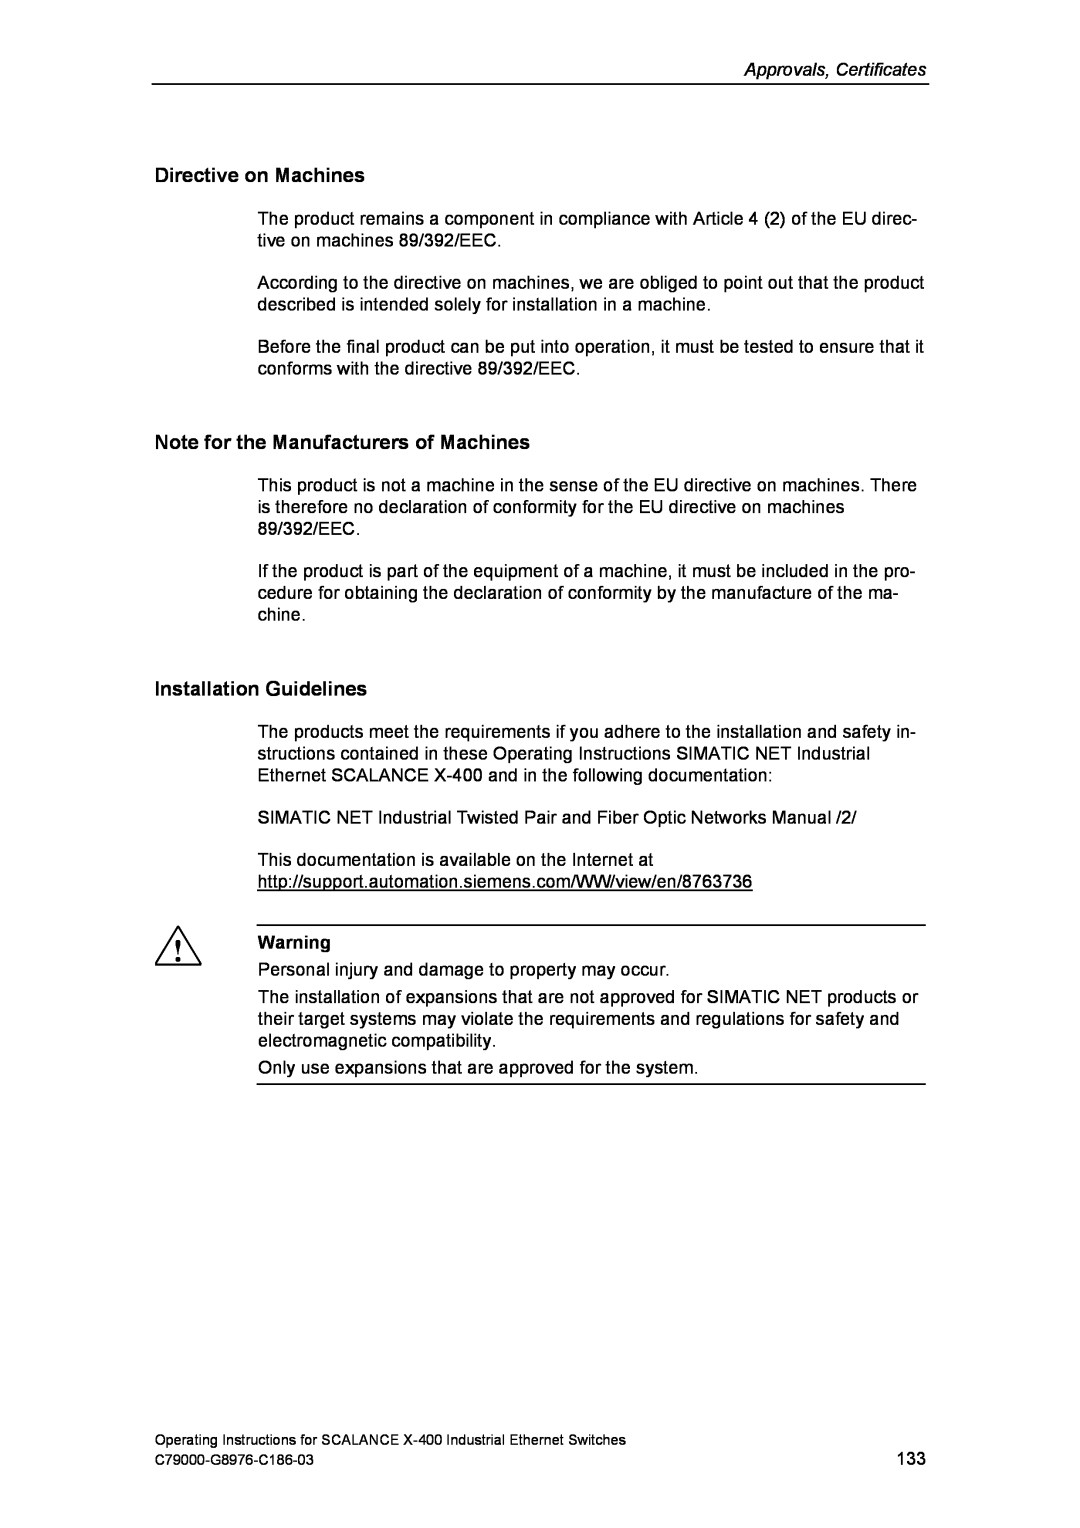 Siemens X-400 Directive on Machines, Note for the Manufacturers of Machines, Installation Guidelines 